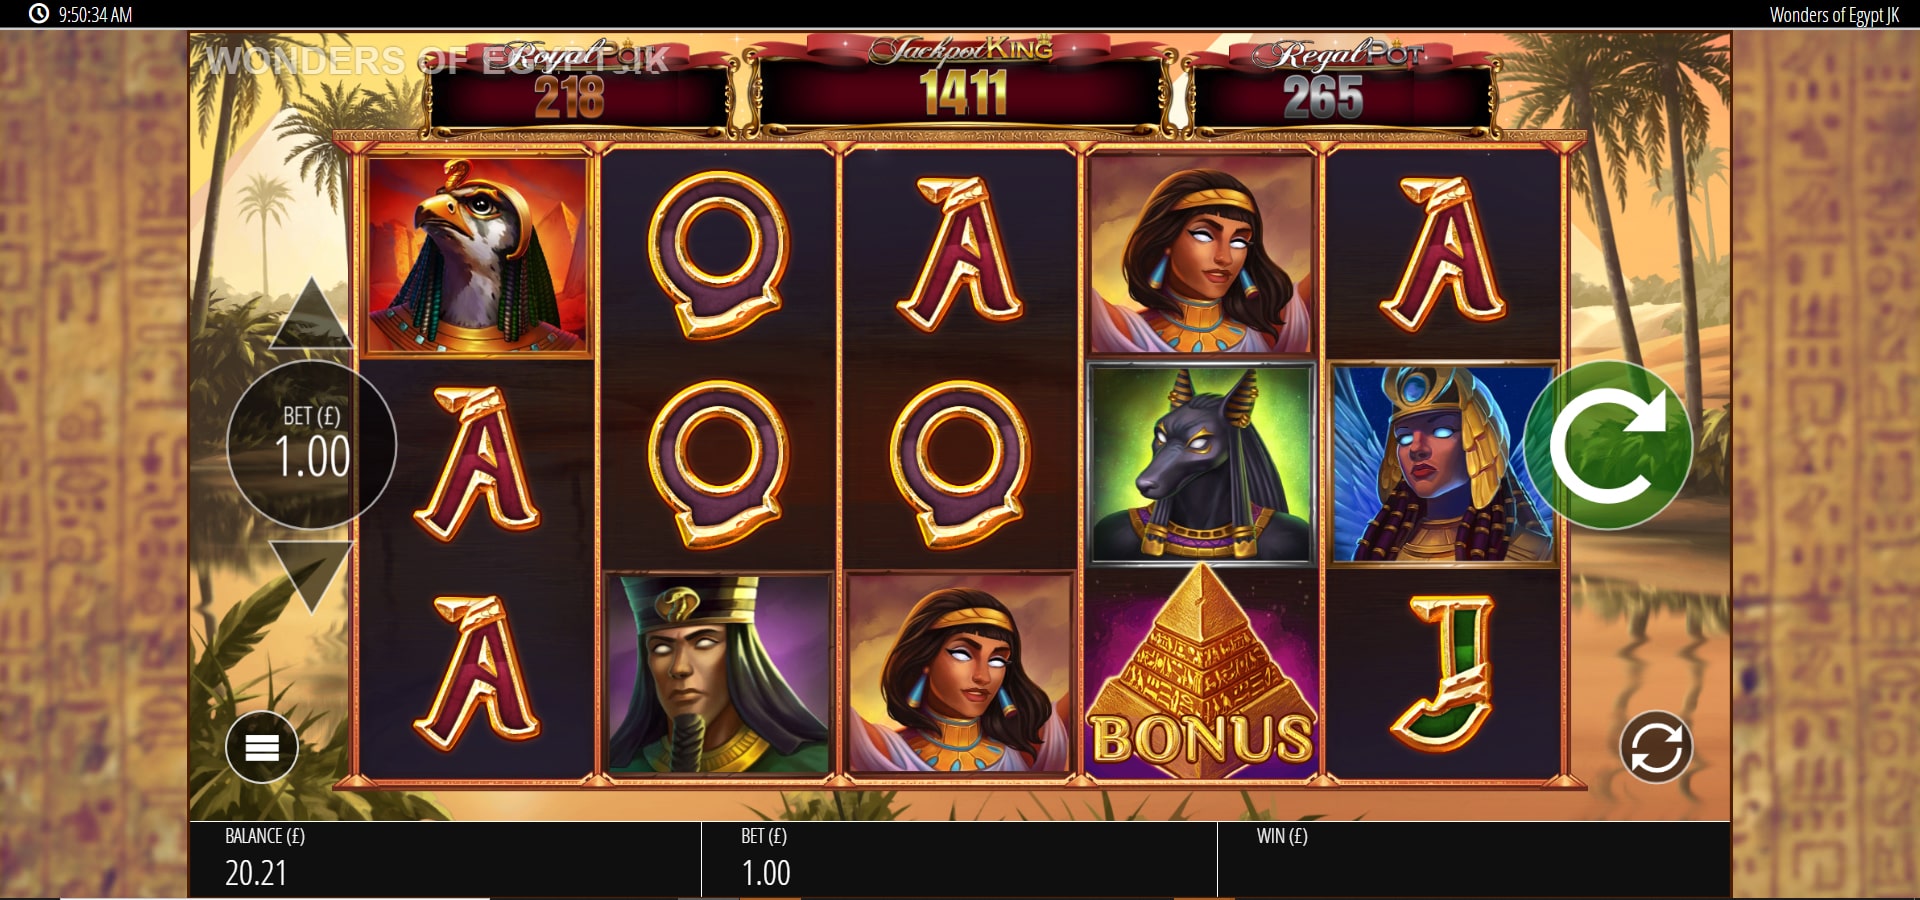 Wonders Of Egypt Jackpot King Free Spins